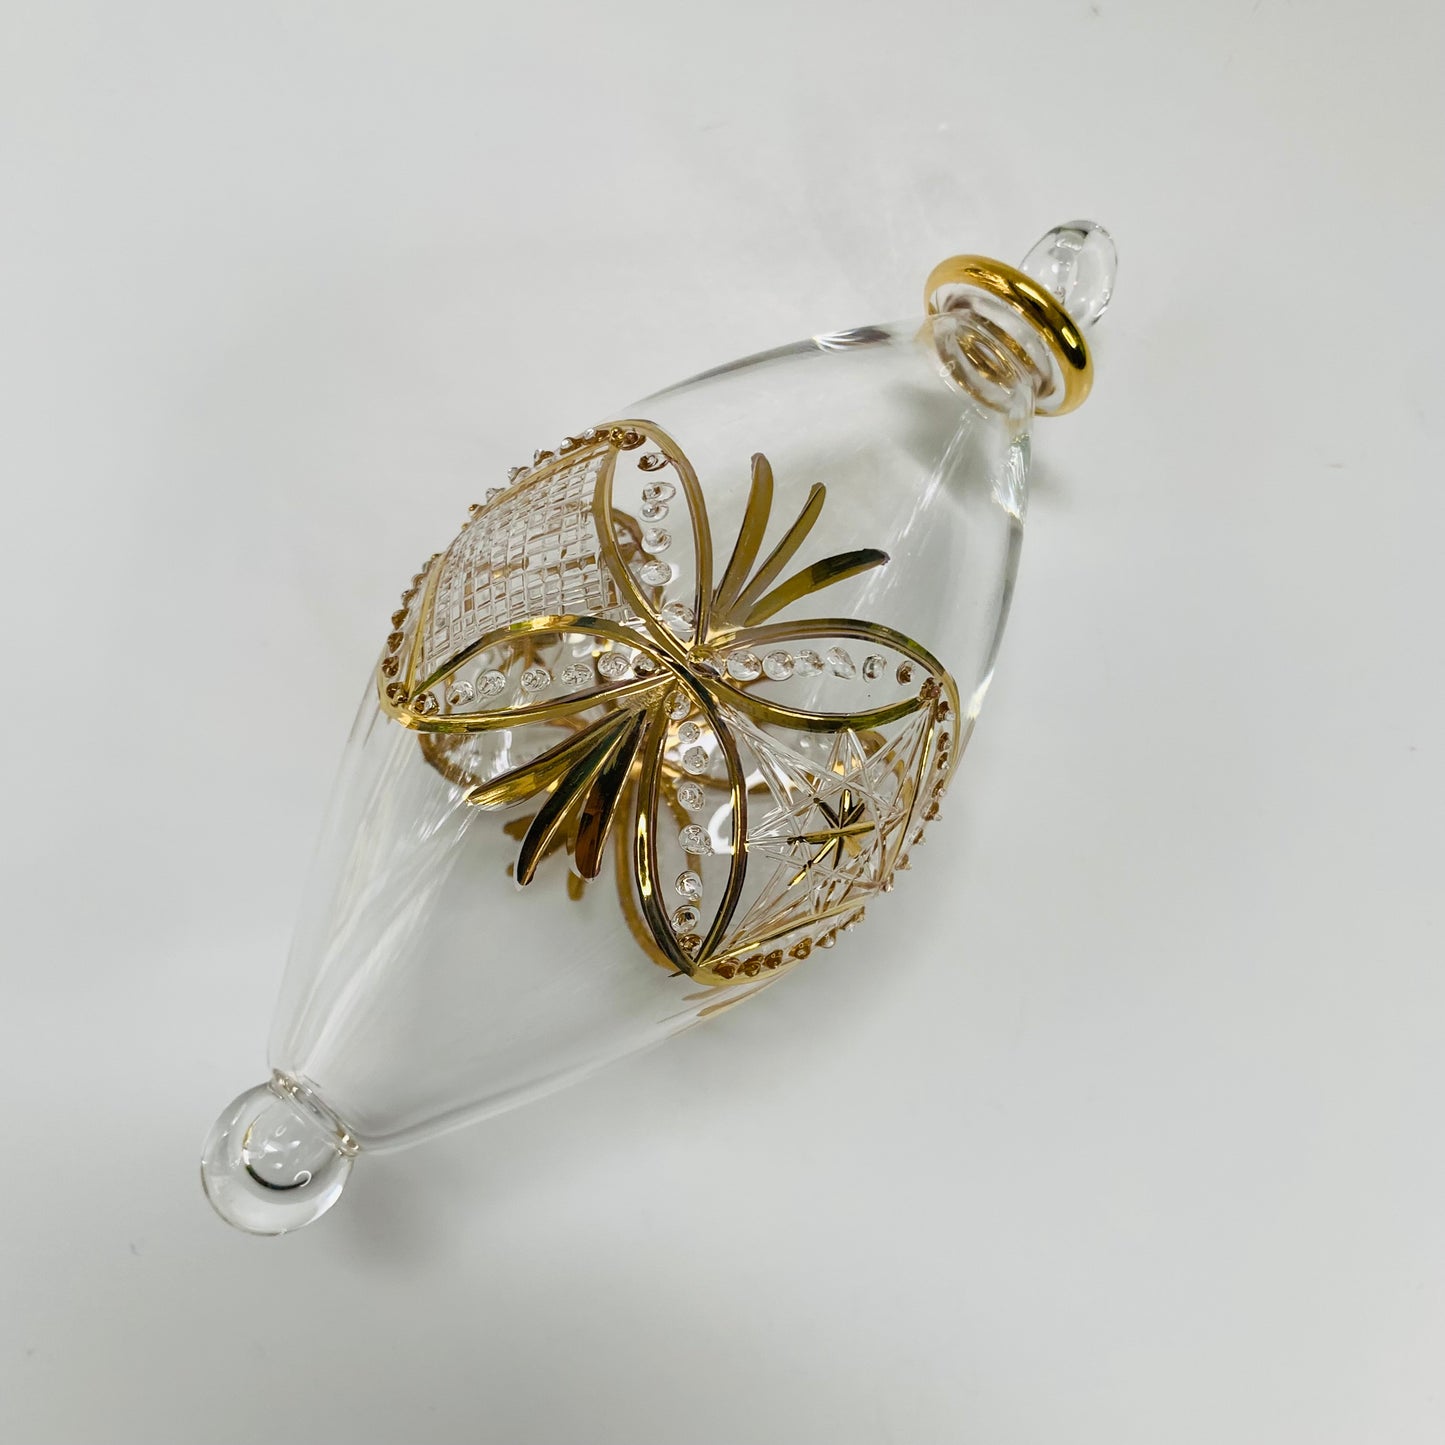 Blown Glass Oval Ornament - Gold Carousel